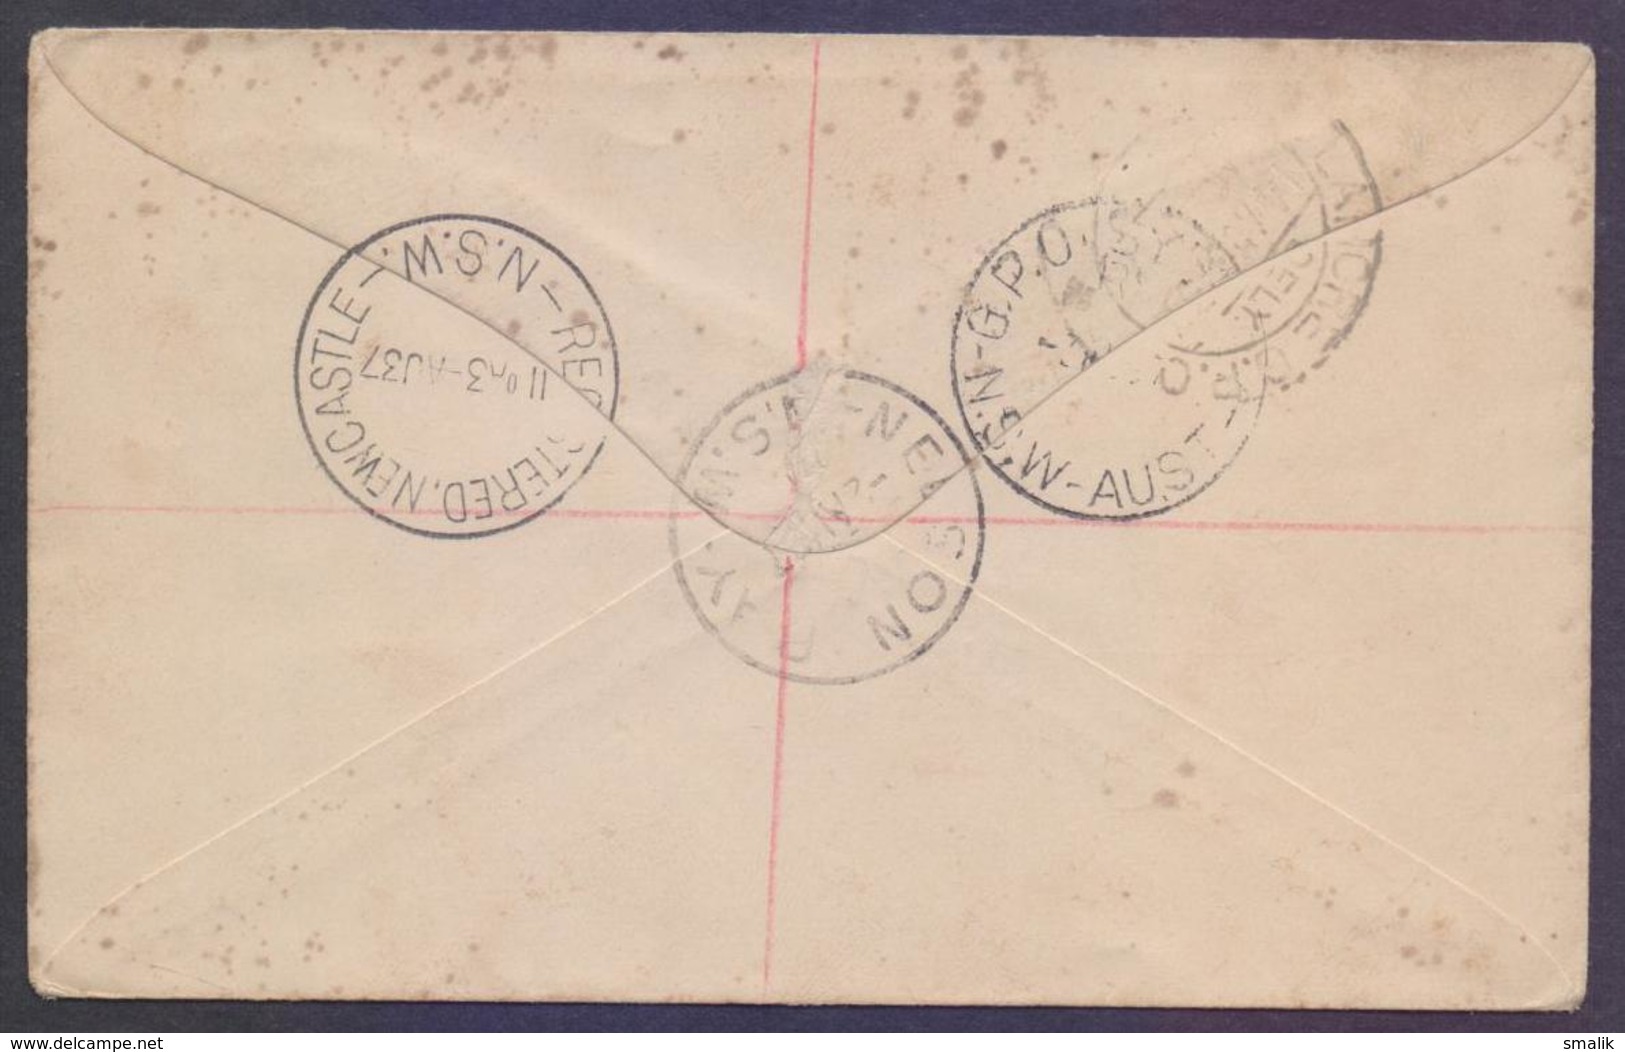 AUSTRALIA Postal History Cover, Registered Used 2.8.1937 From NELSON BAY To LAHORE INDIA (Now PAKISTAN) - Covers & Documents